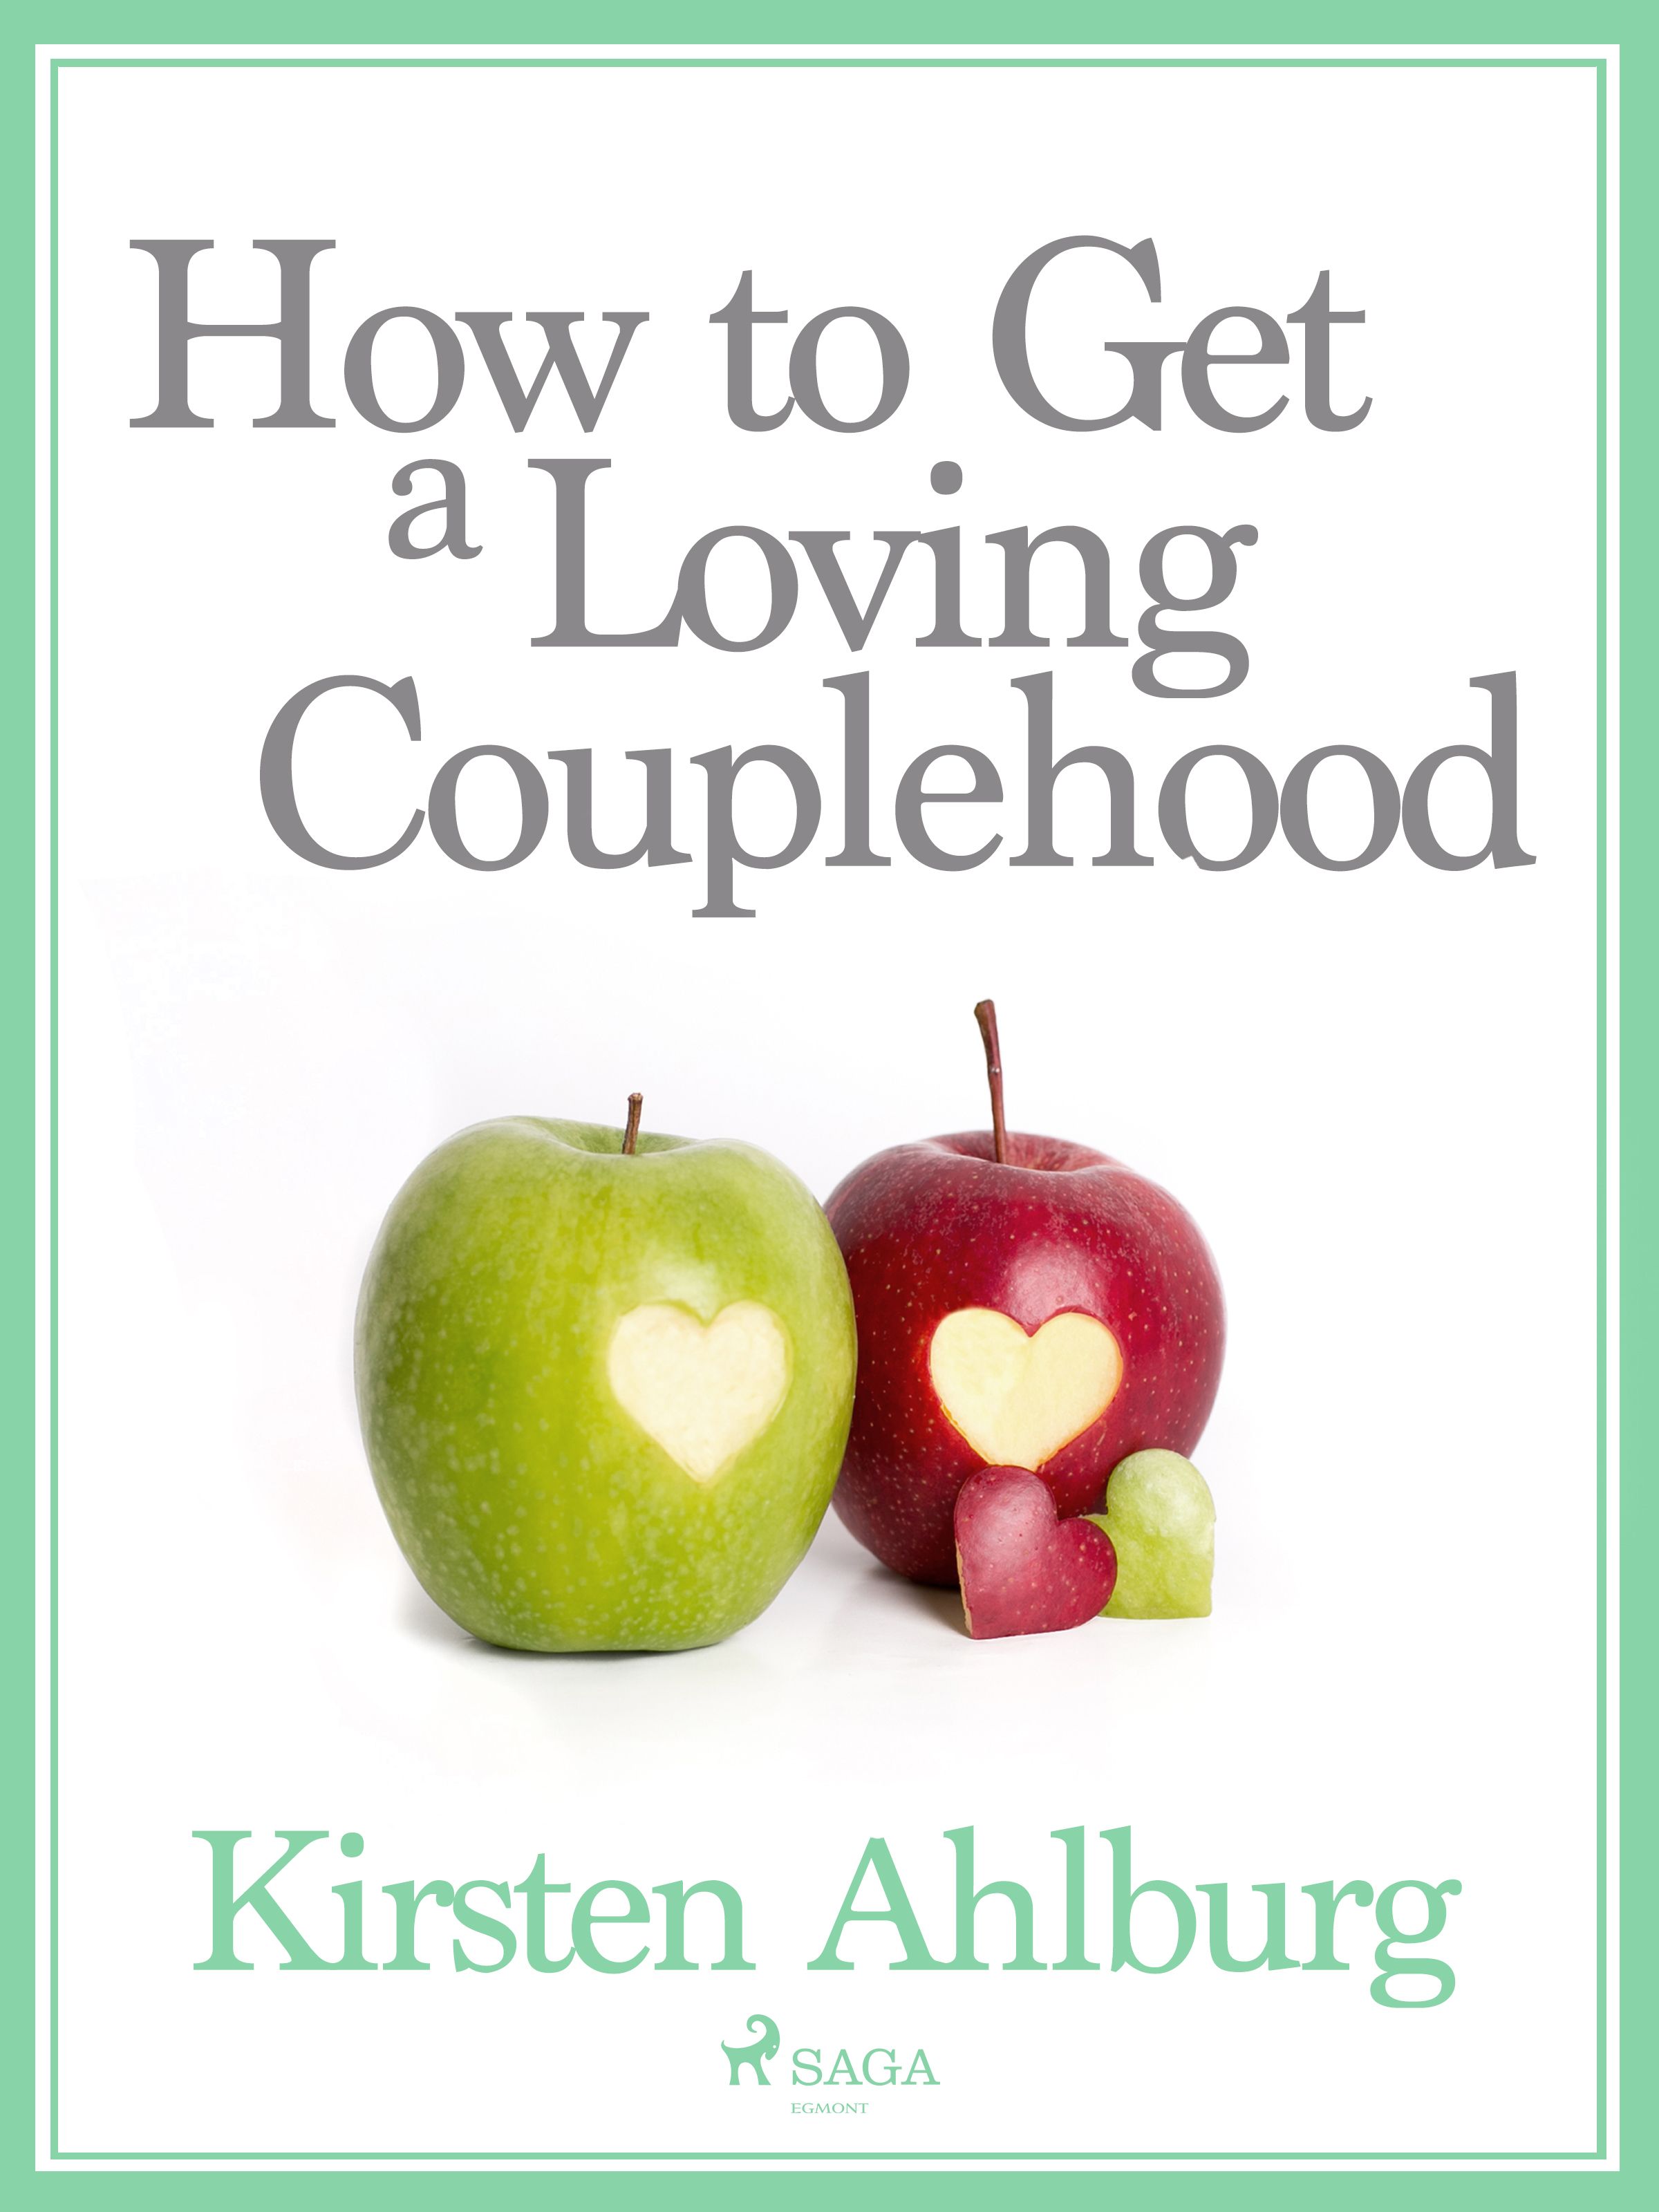 How to Get a Loving Couplehood, eBook by Kirsten Ahlburg